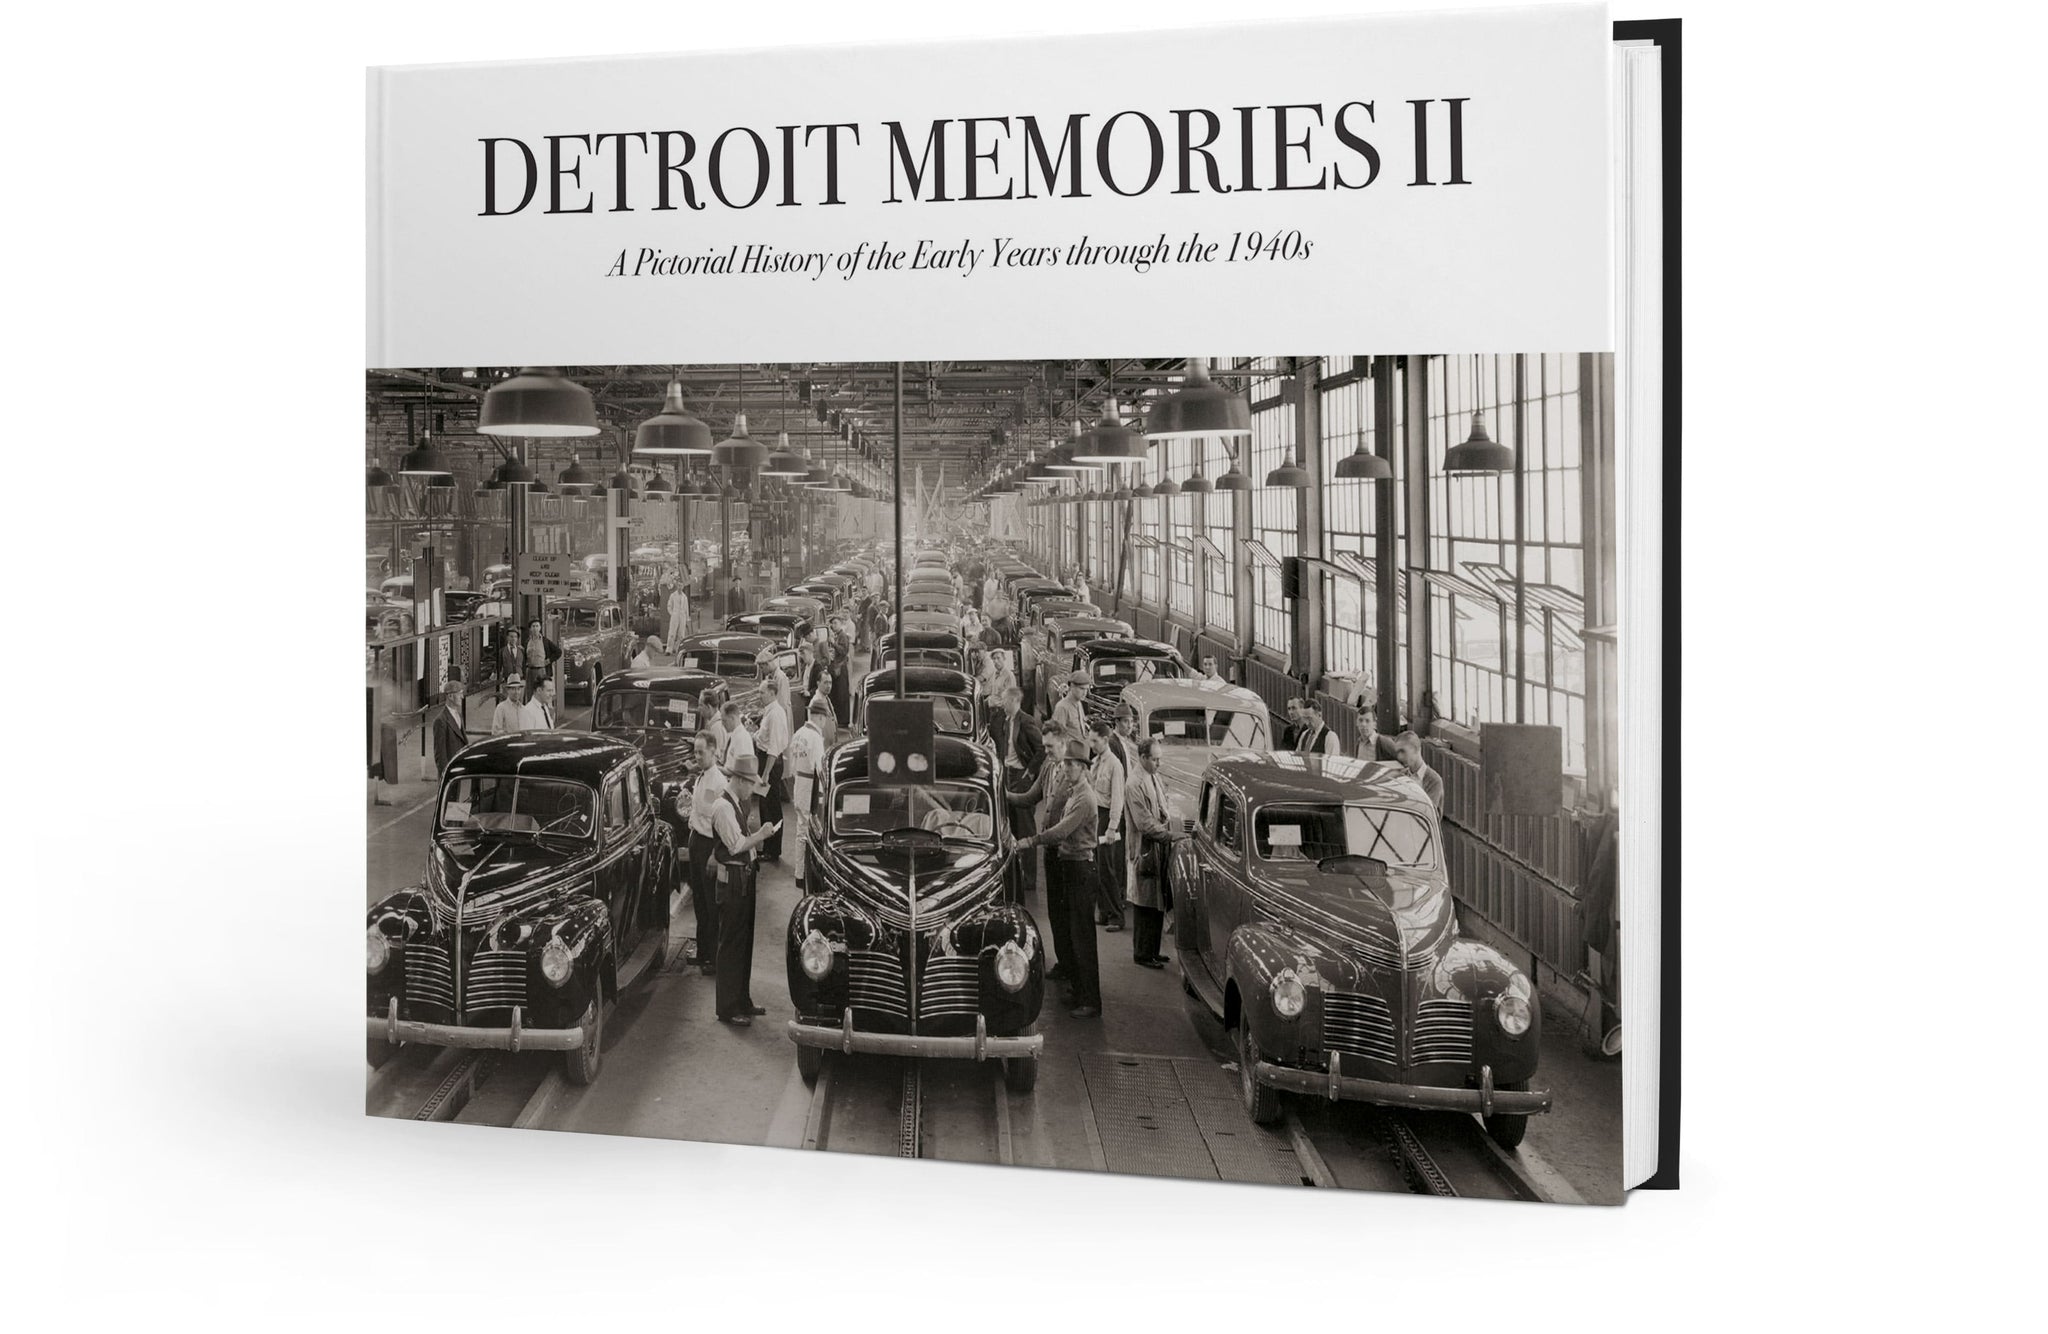 Detroit Memories Volume II: A Pictorial History of the Early Years through the 1940s